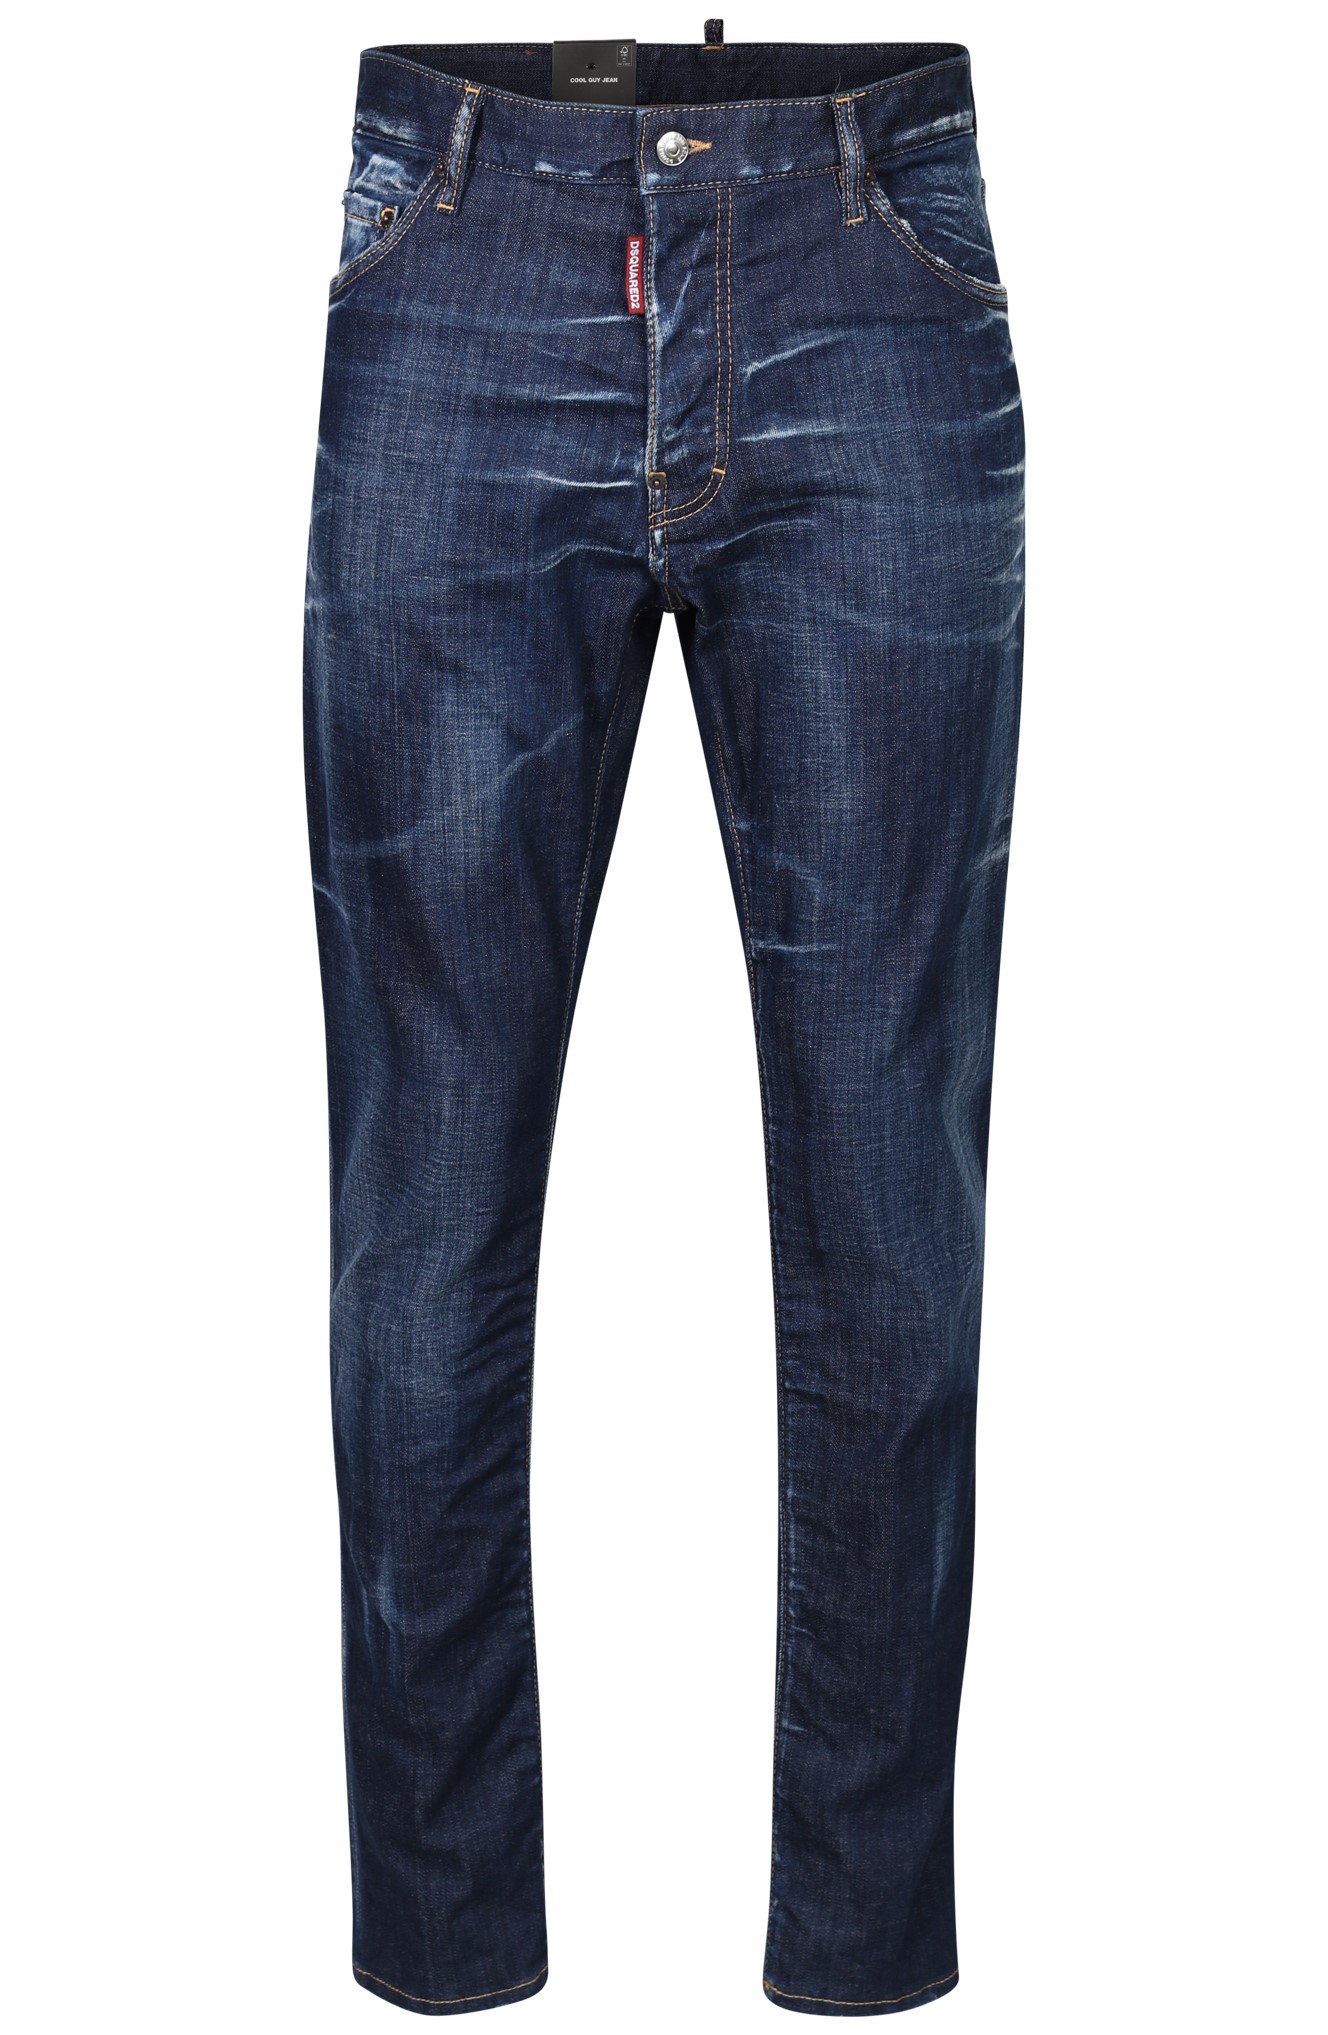 DSQUARED2 Cool Guy Jeans in Washed Dark Blue